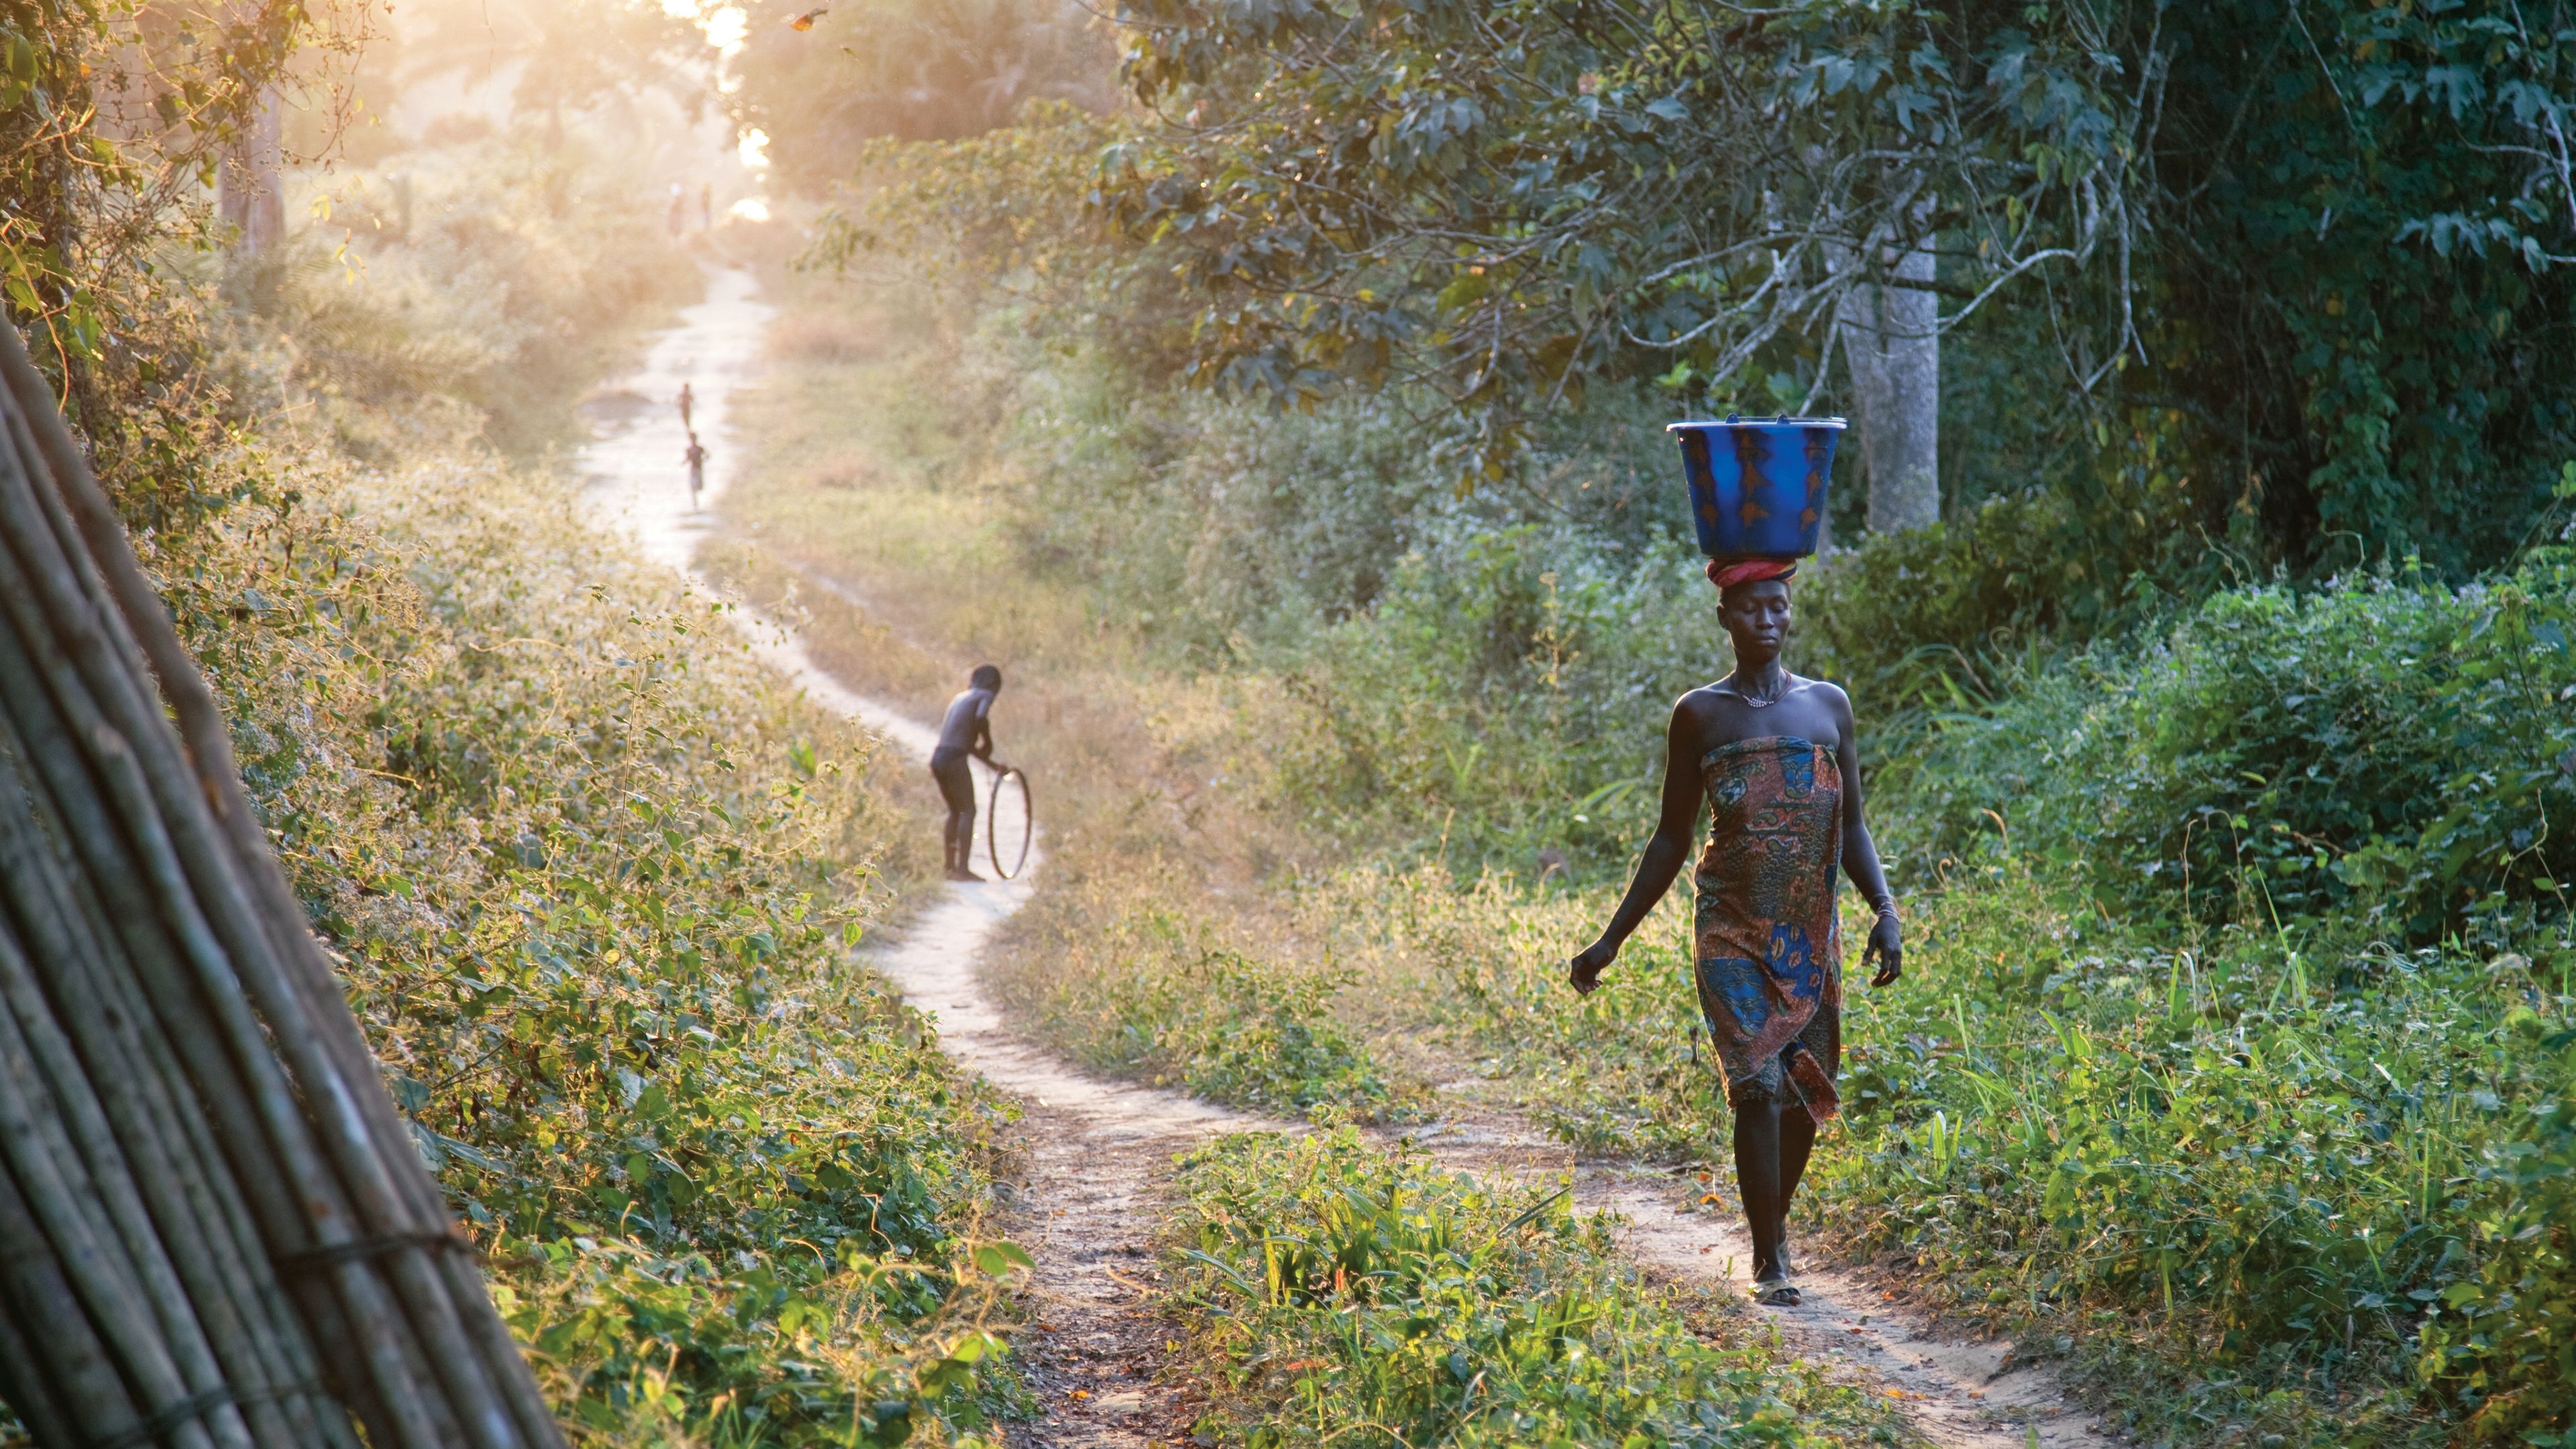 An African woman balancing a bucket on her head while walking down a path.